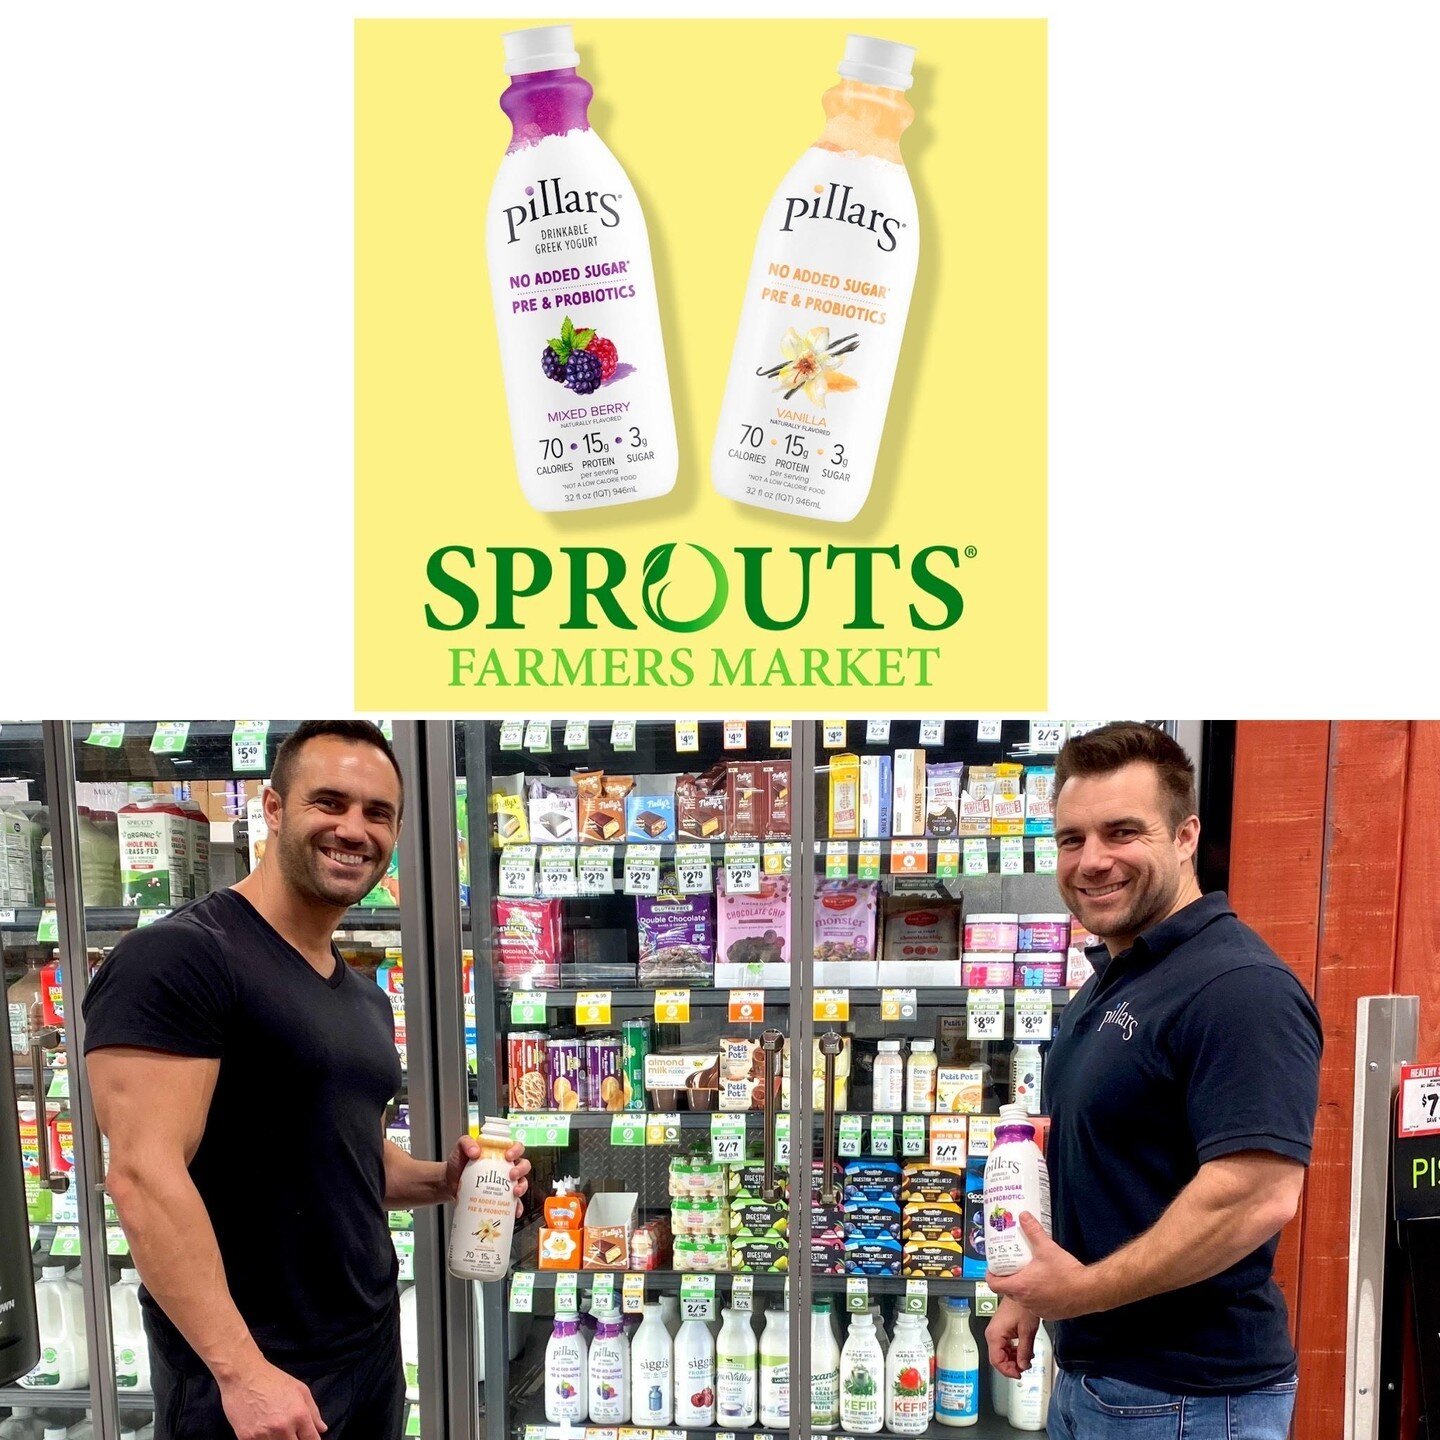 New Store &amp; Free Yogurt Alert 🎊🎉⁠
⁠
Our Mixed Berry and Vanilla 32oz drinkable yogurts are now available at Sprouts stores nationwide! ⁠
⁠
To celebrate we are giving one lucky fan a FREE 1 Month supply of yogurt. ⁠
⁠
For your chance to win:⁠
⁠
